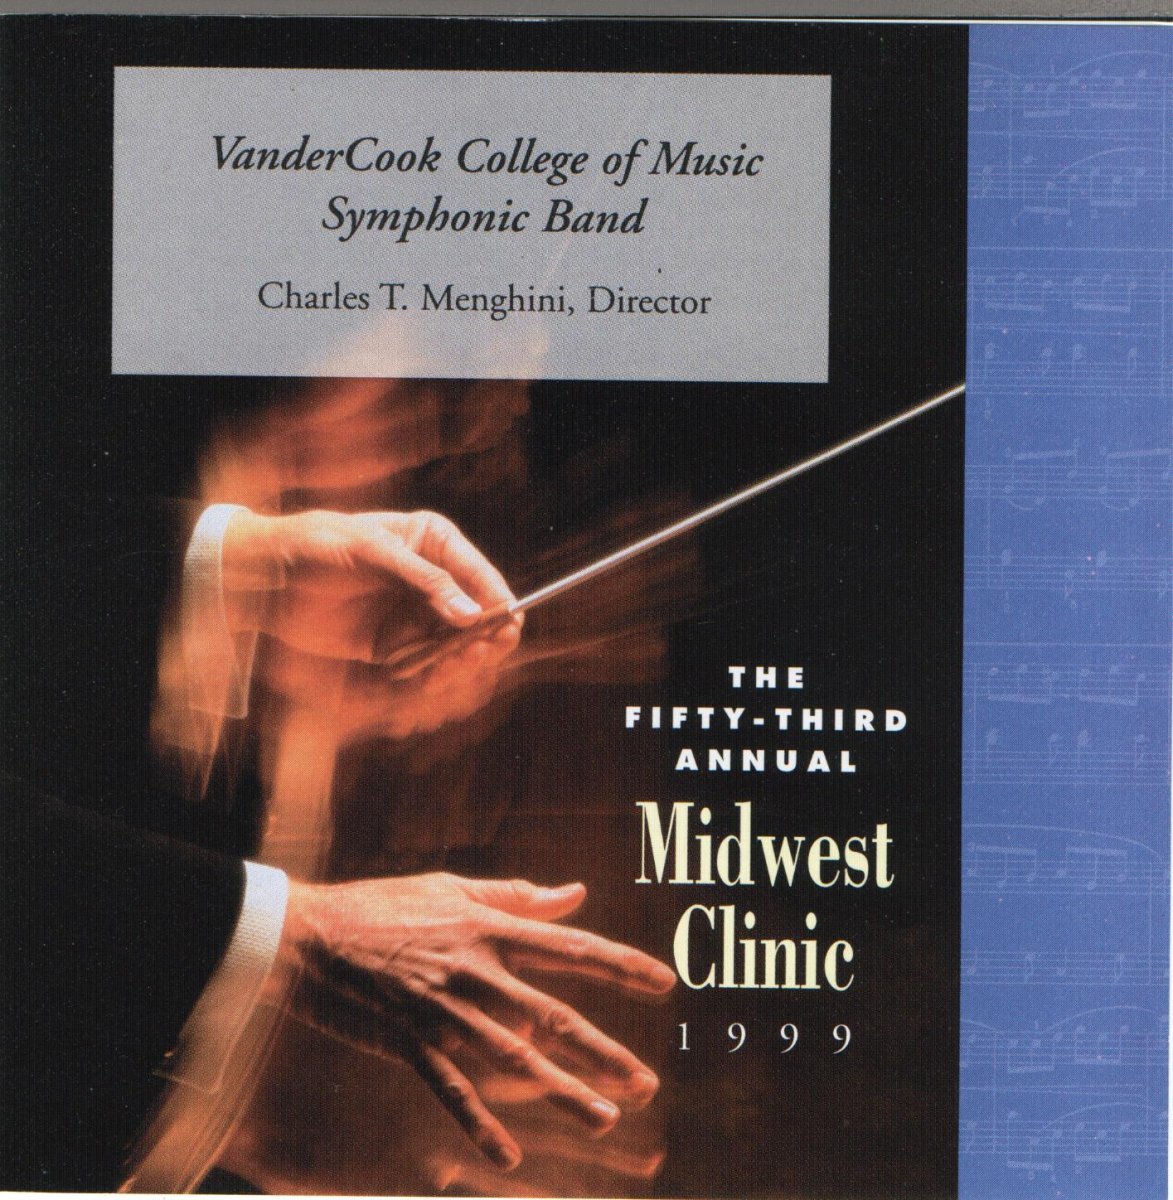 1999 Midwest Clinic: VanderCook College of Music Symphonic Band - cliquer ici